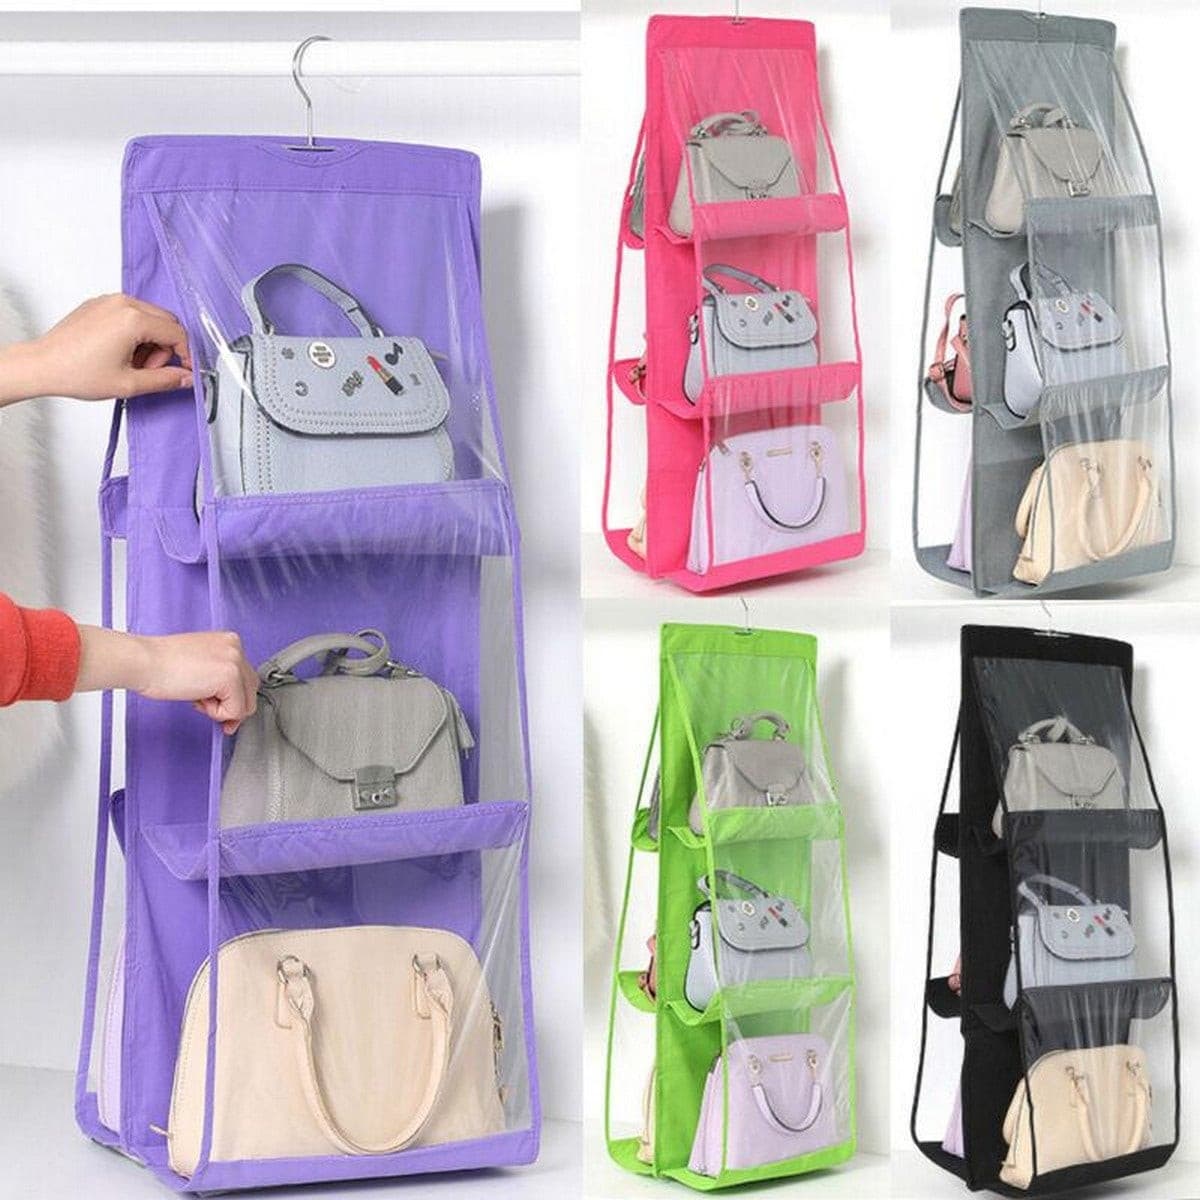 6 Pocket Double Sided Hand Bag / Purse Organizer - DS Traders